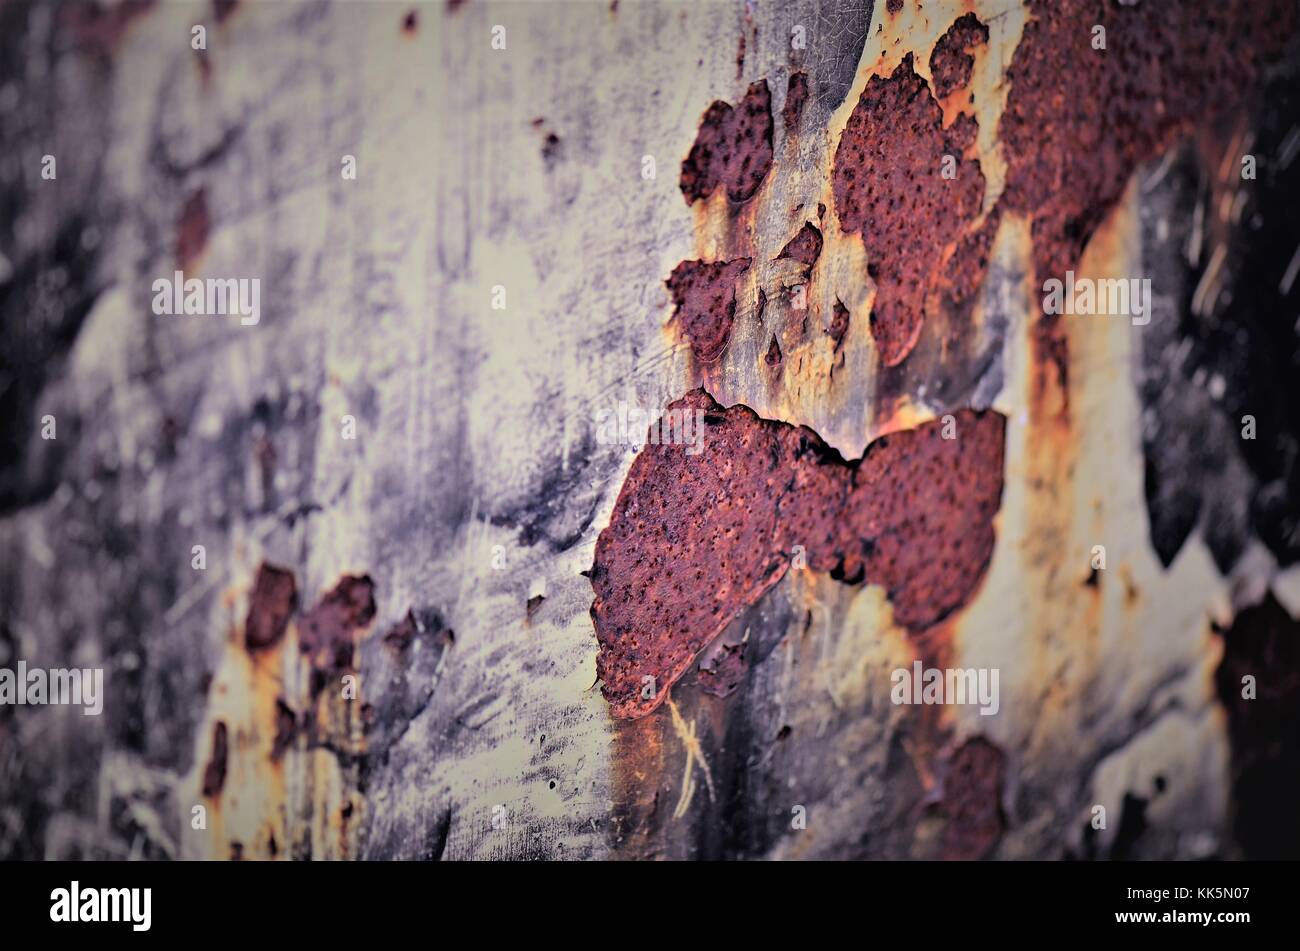 Rusted, corrosion and age coloured metal surface Stock Photo